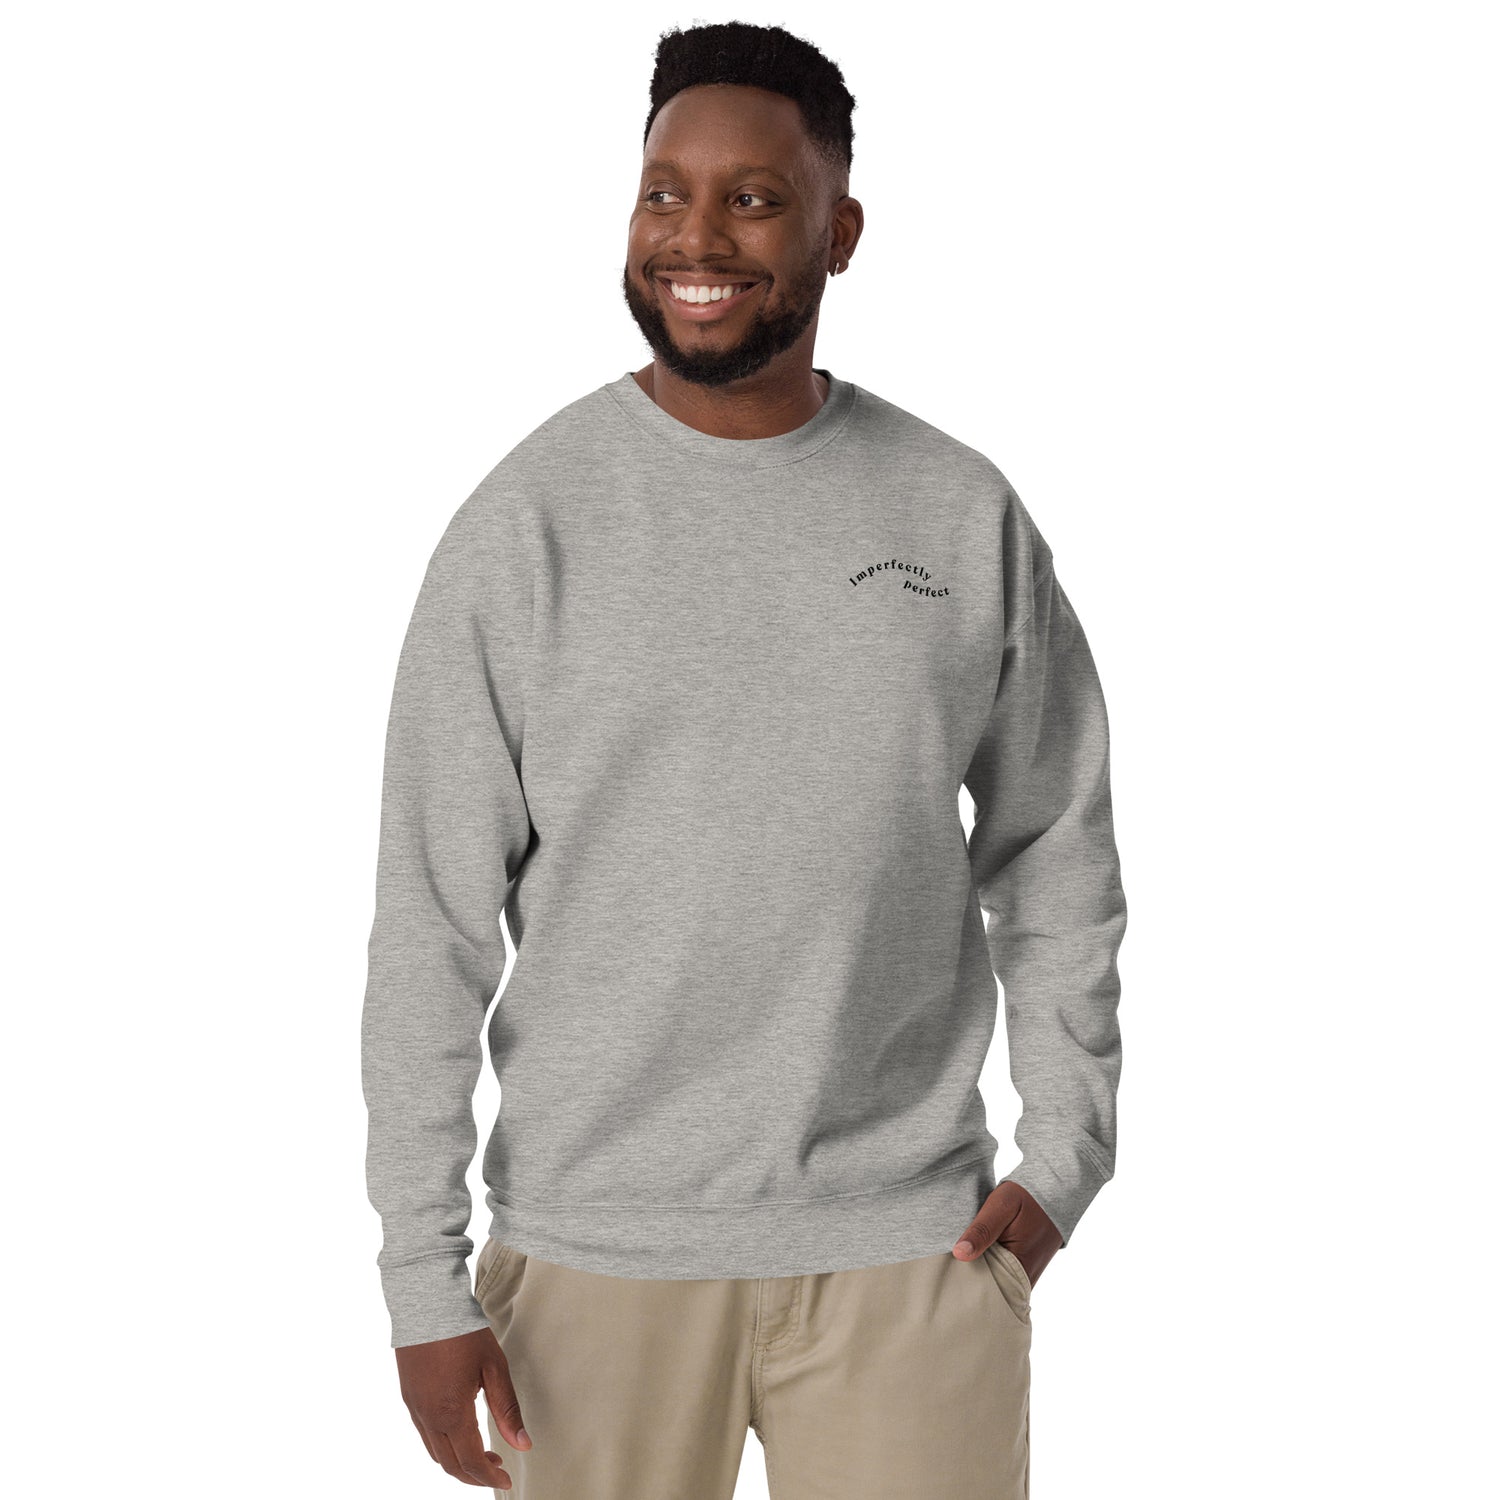 Grey crewneck sweatshirt supporting the "imperfectly perfect" in oneself.